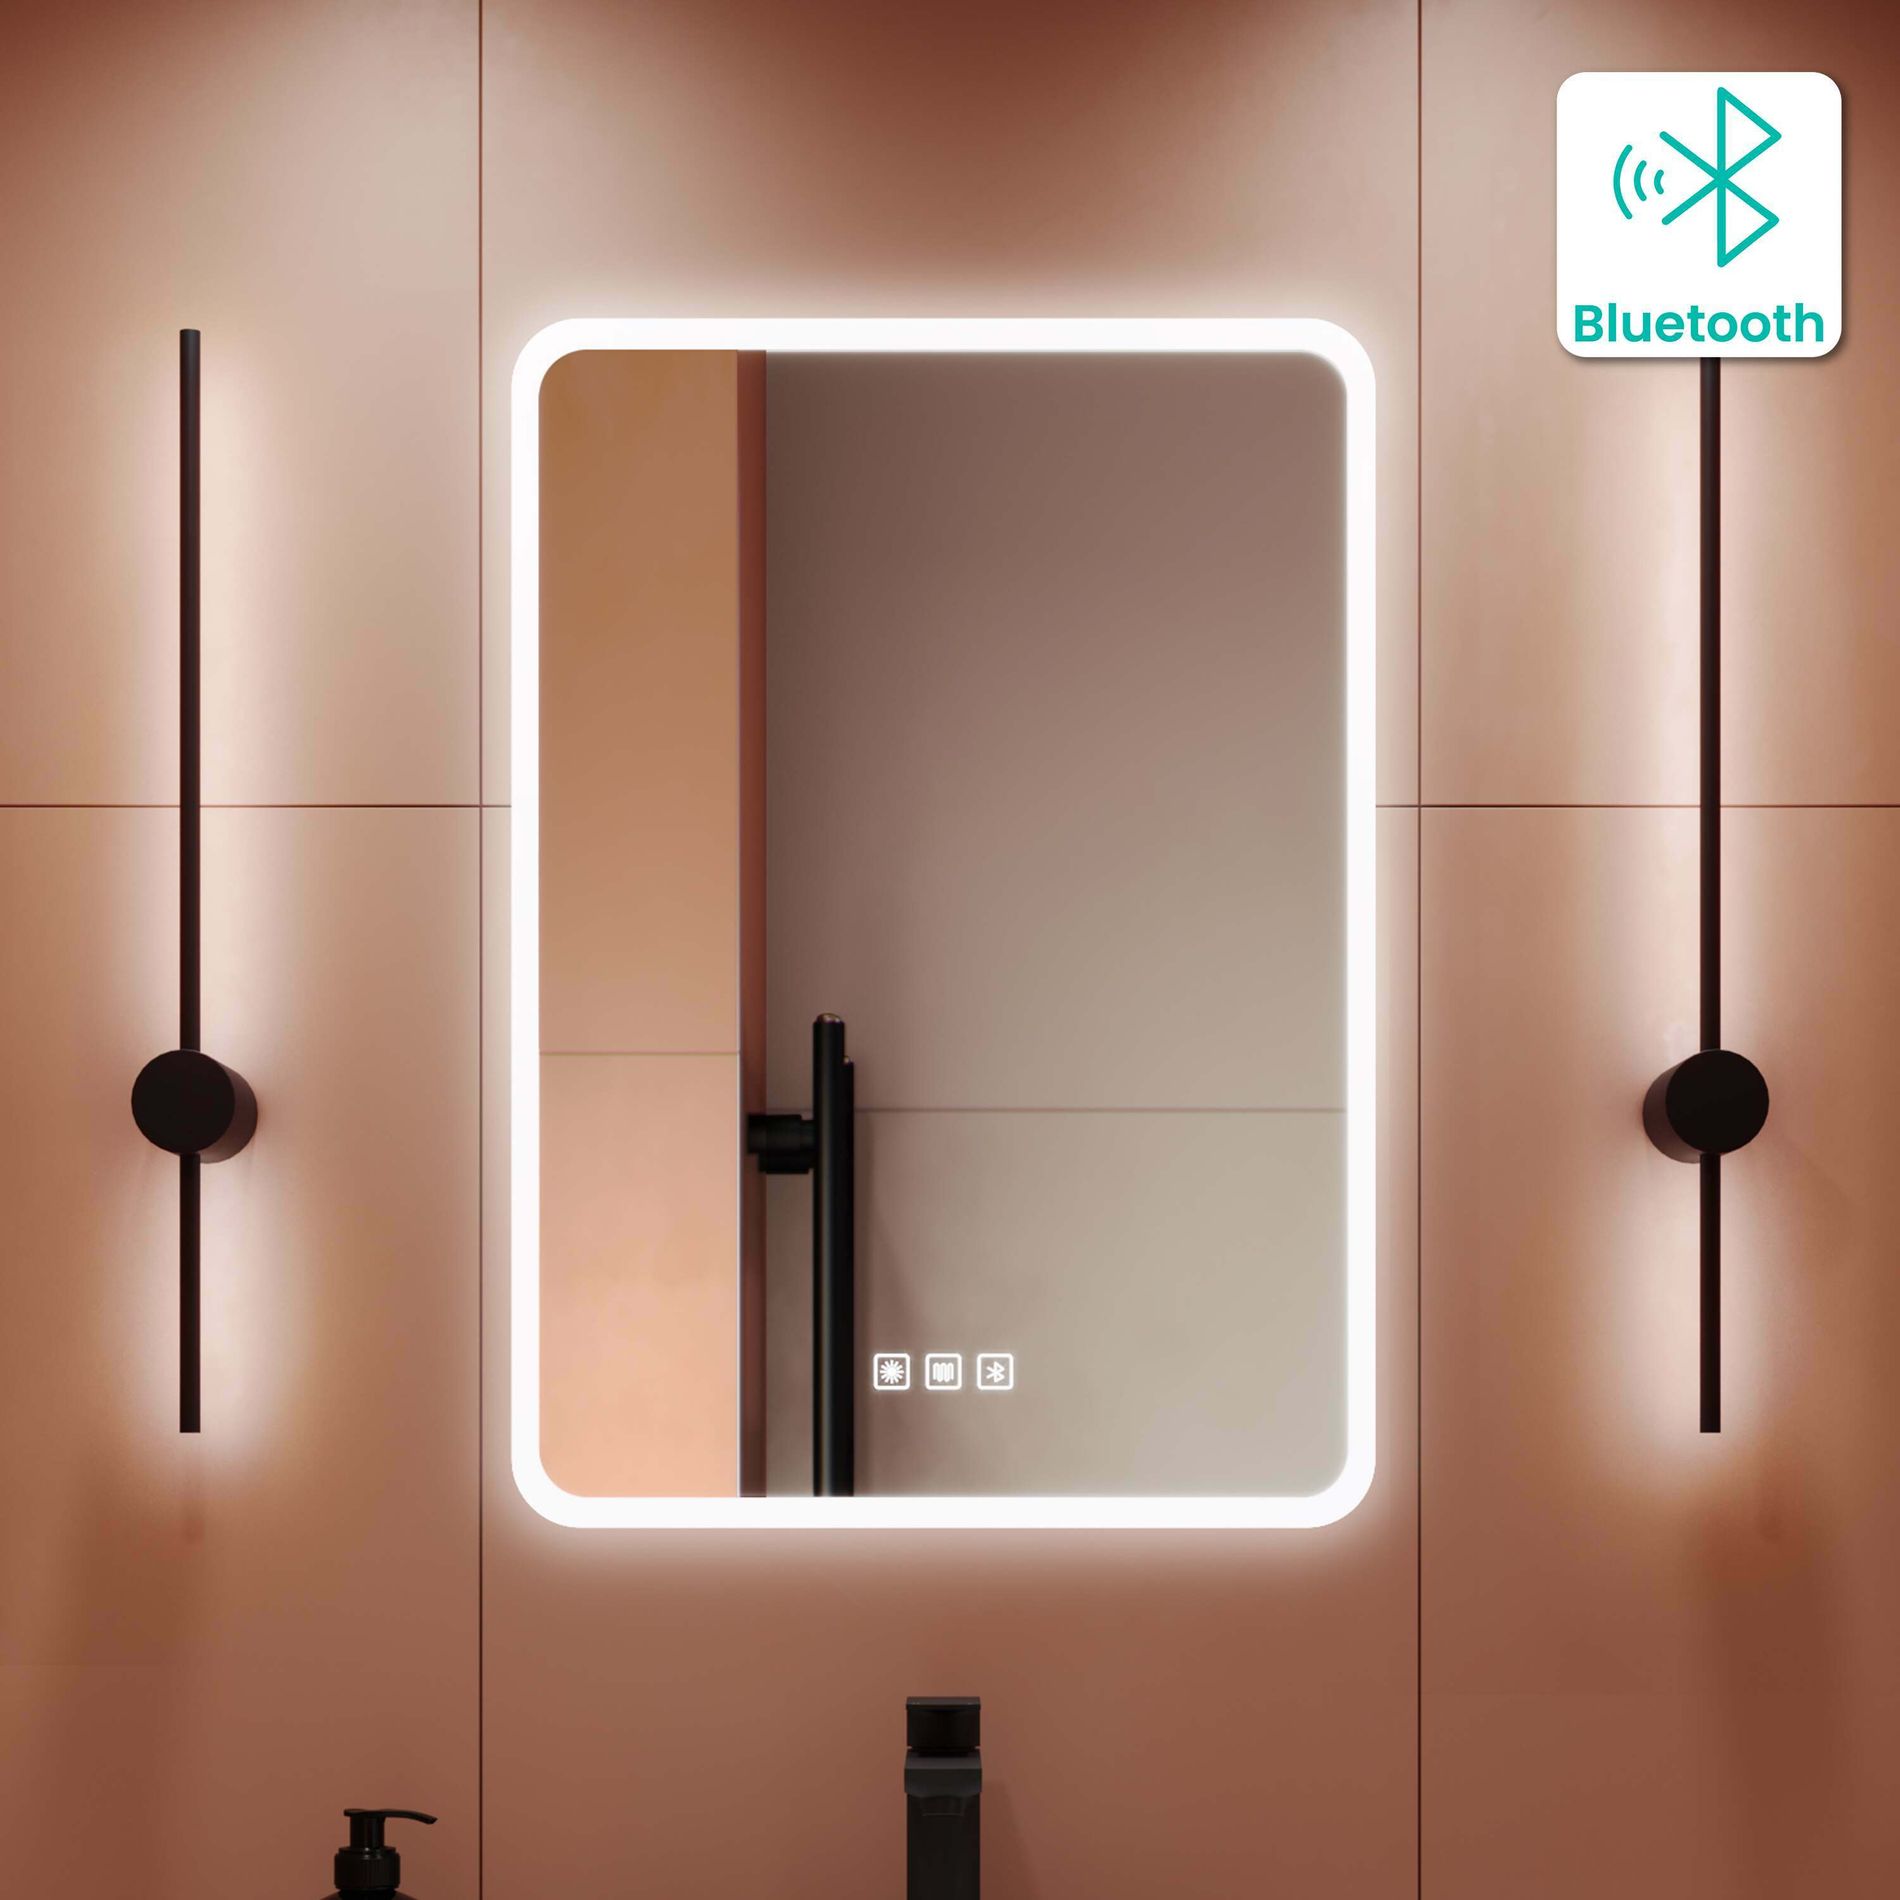 The Bath People Garrow LED Mirror with Built-In Bluetooth Speakers 50cm x 70cm 